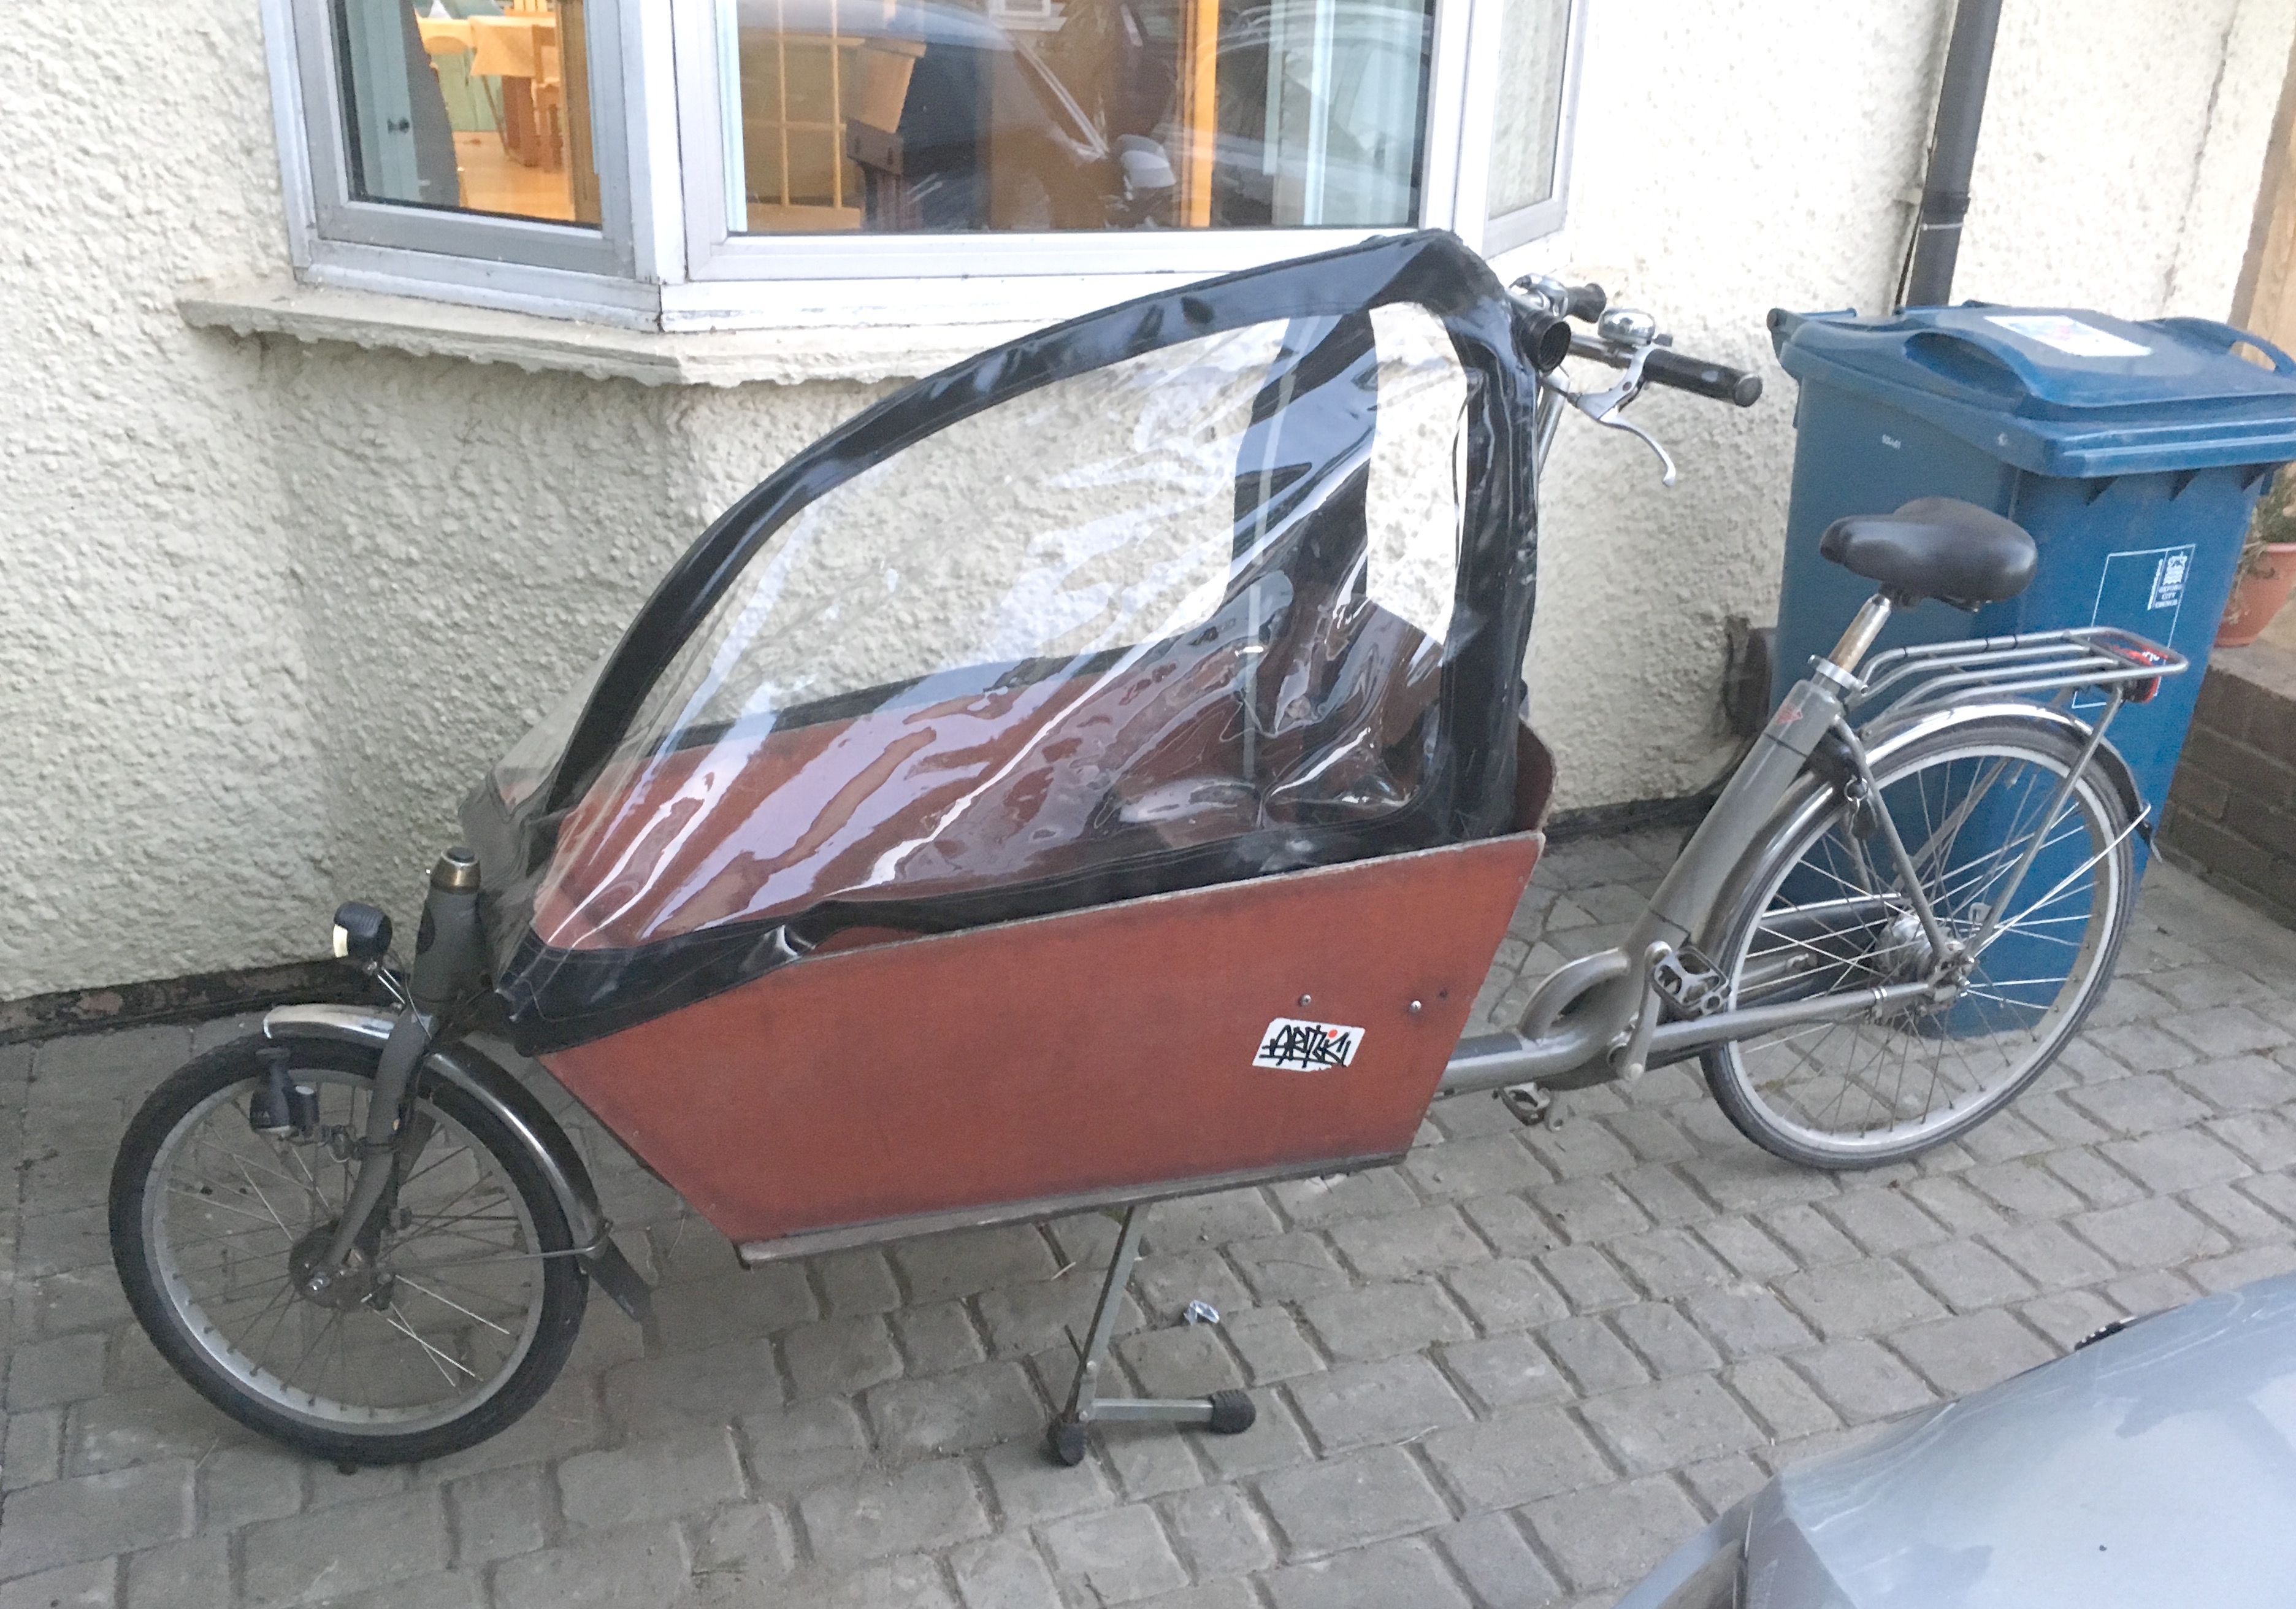 My lovely new Bakfiets cargo bike